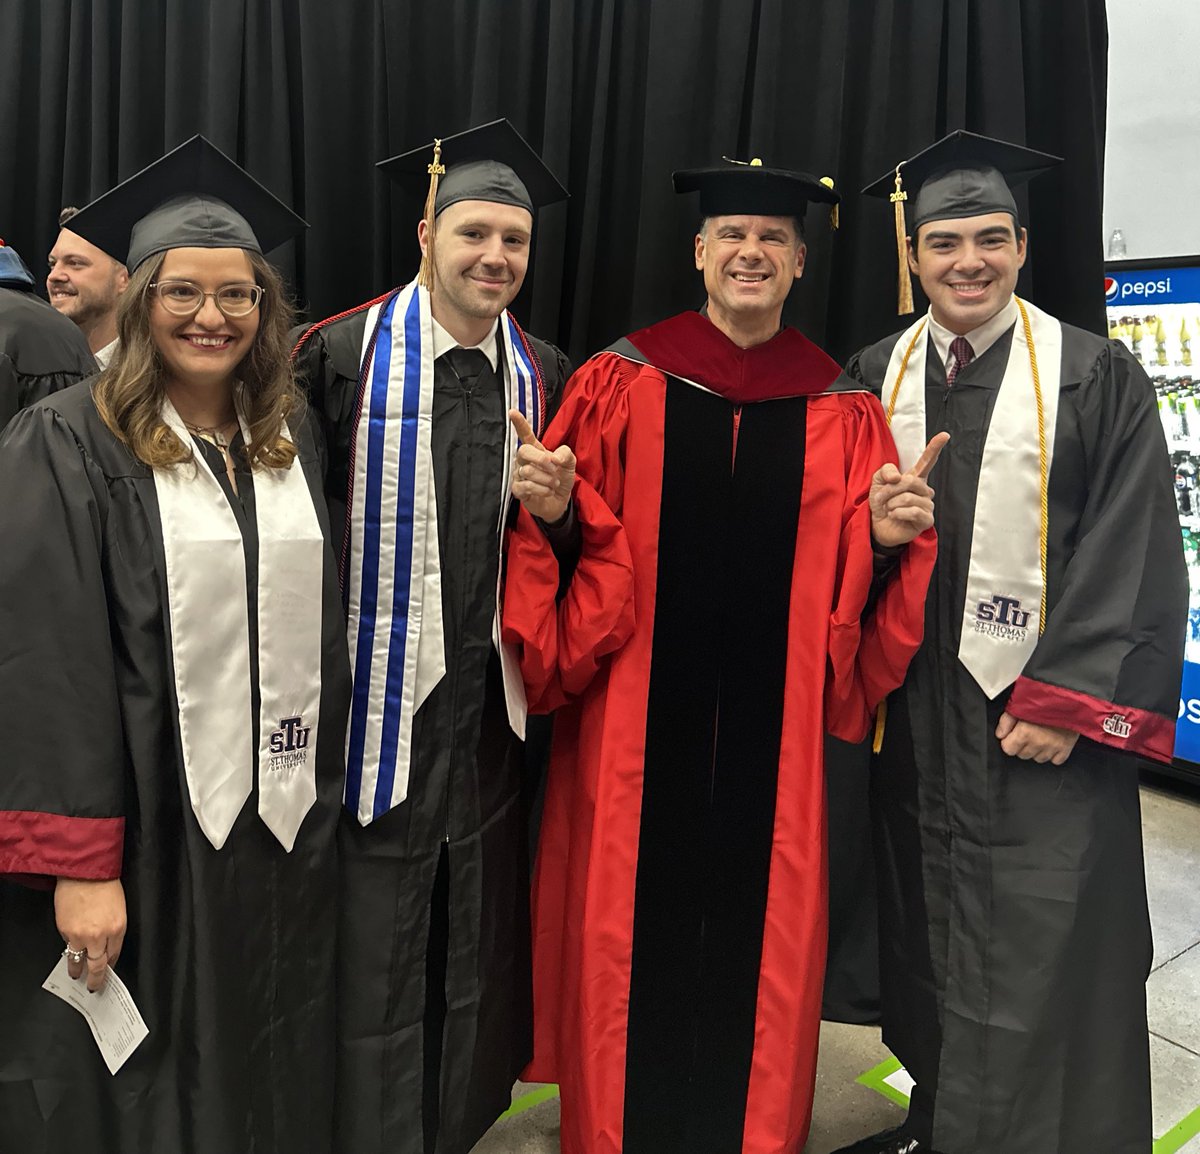 Congratulations to all our @StThomasUniv graduates! So proud of them especially all our @stu_campusmin and Catholic Leadership Household graduates. God bless you! All the best in the adventures ahead!